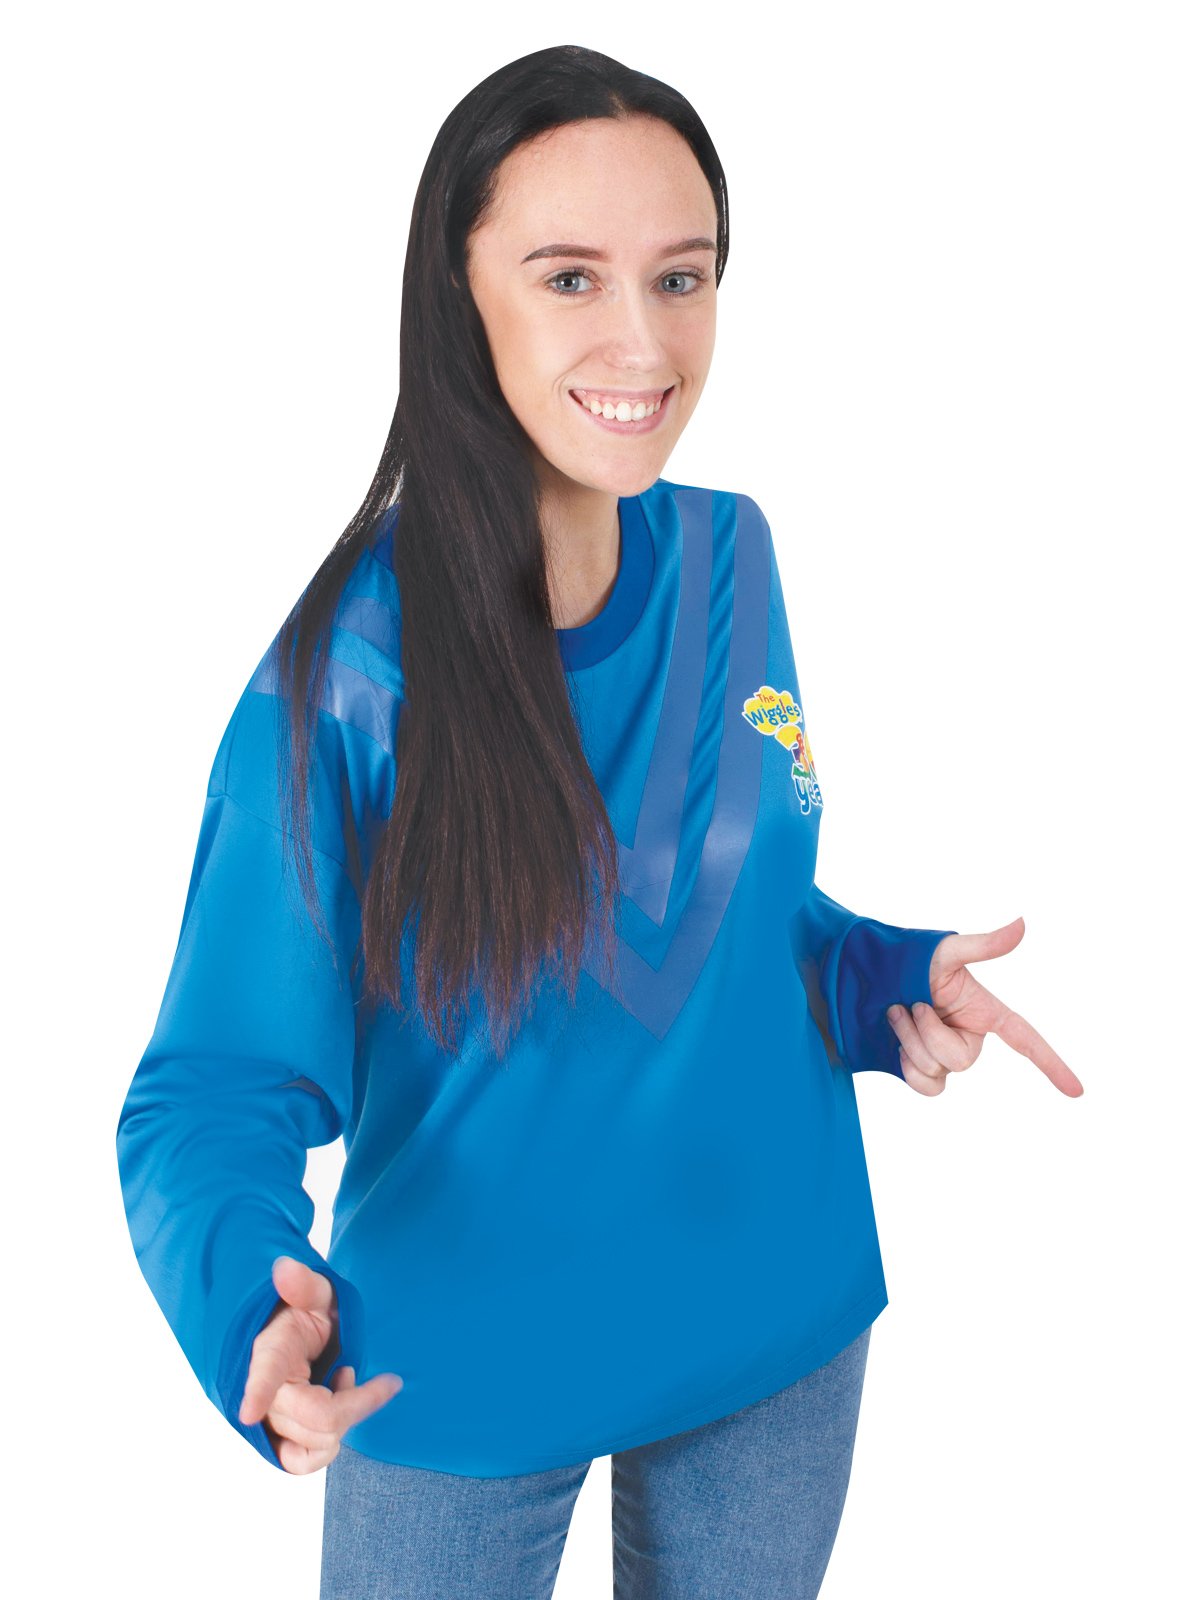 Costume Adult Anthony Wiggle Deluxe Blue Top Xlarge